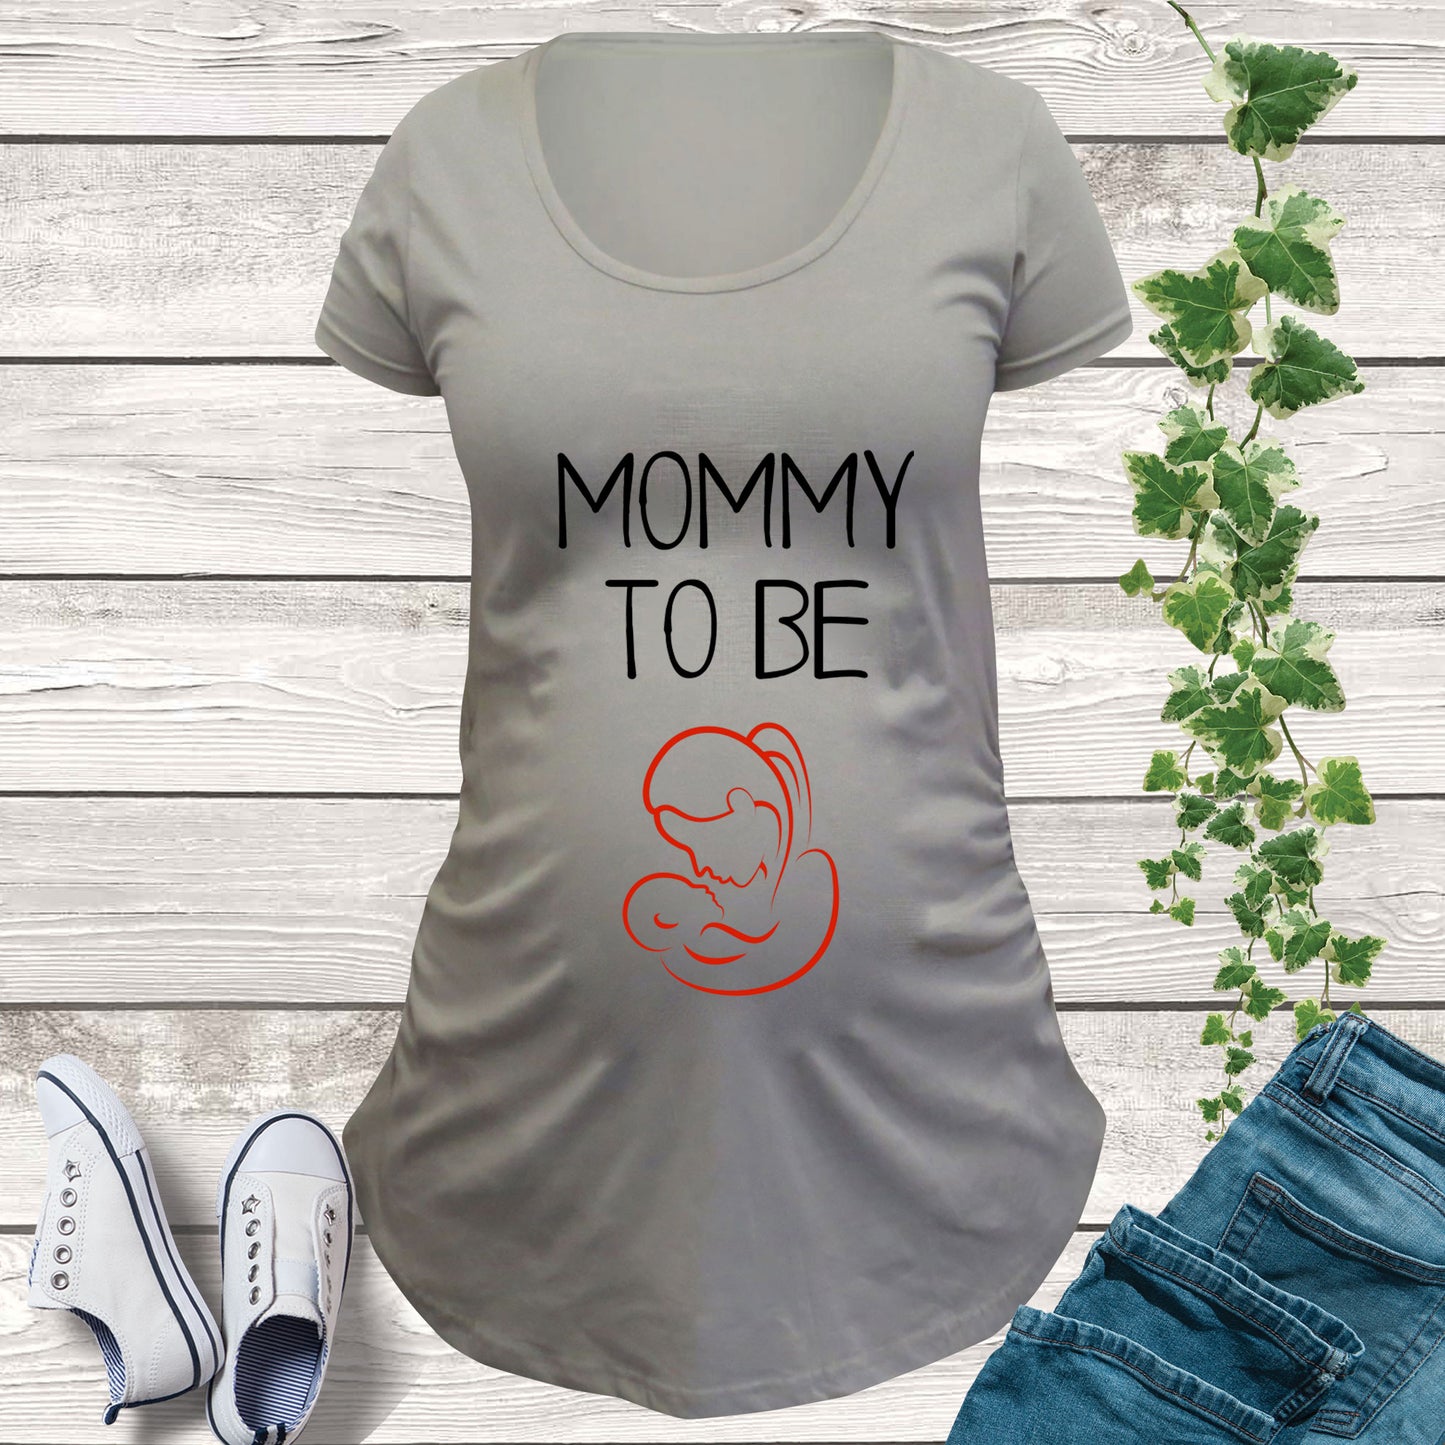 Mommy To Be Baby Announcement Pregnancy T Shirt